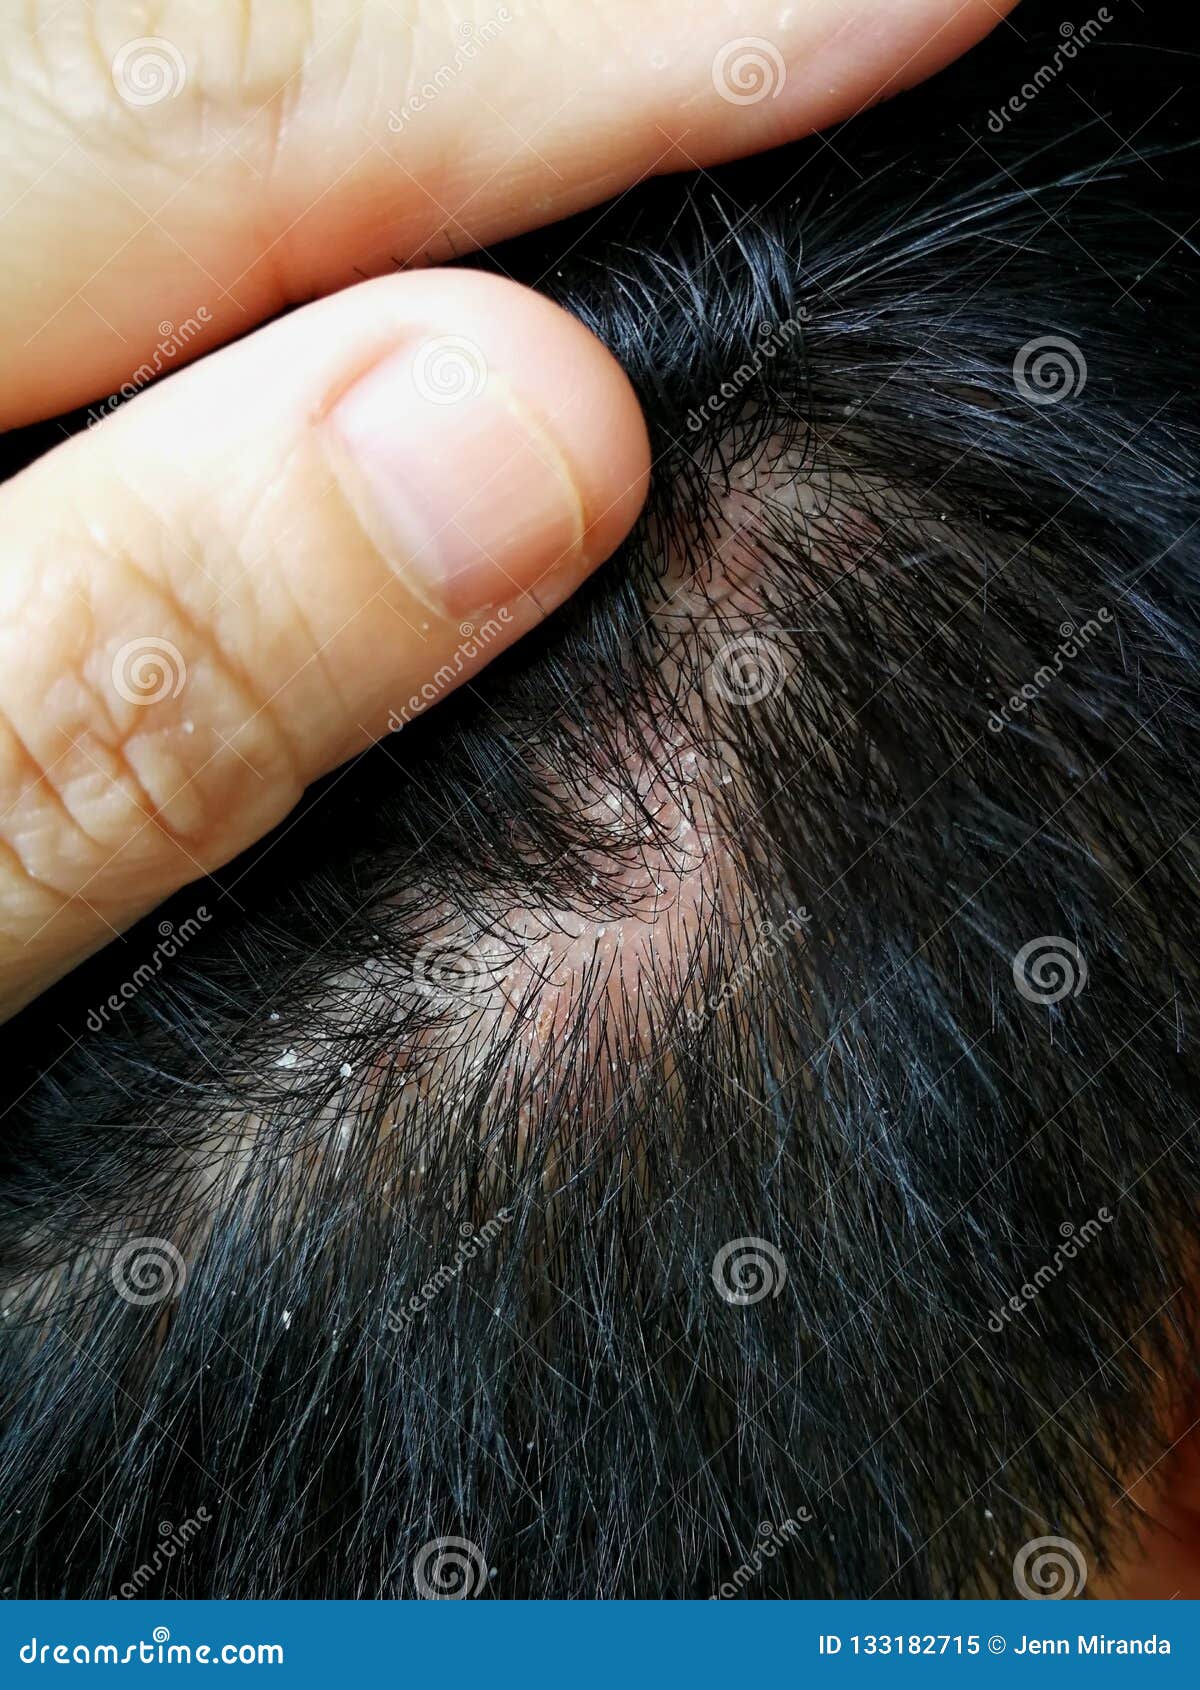 itchy scalp and dandruff